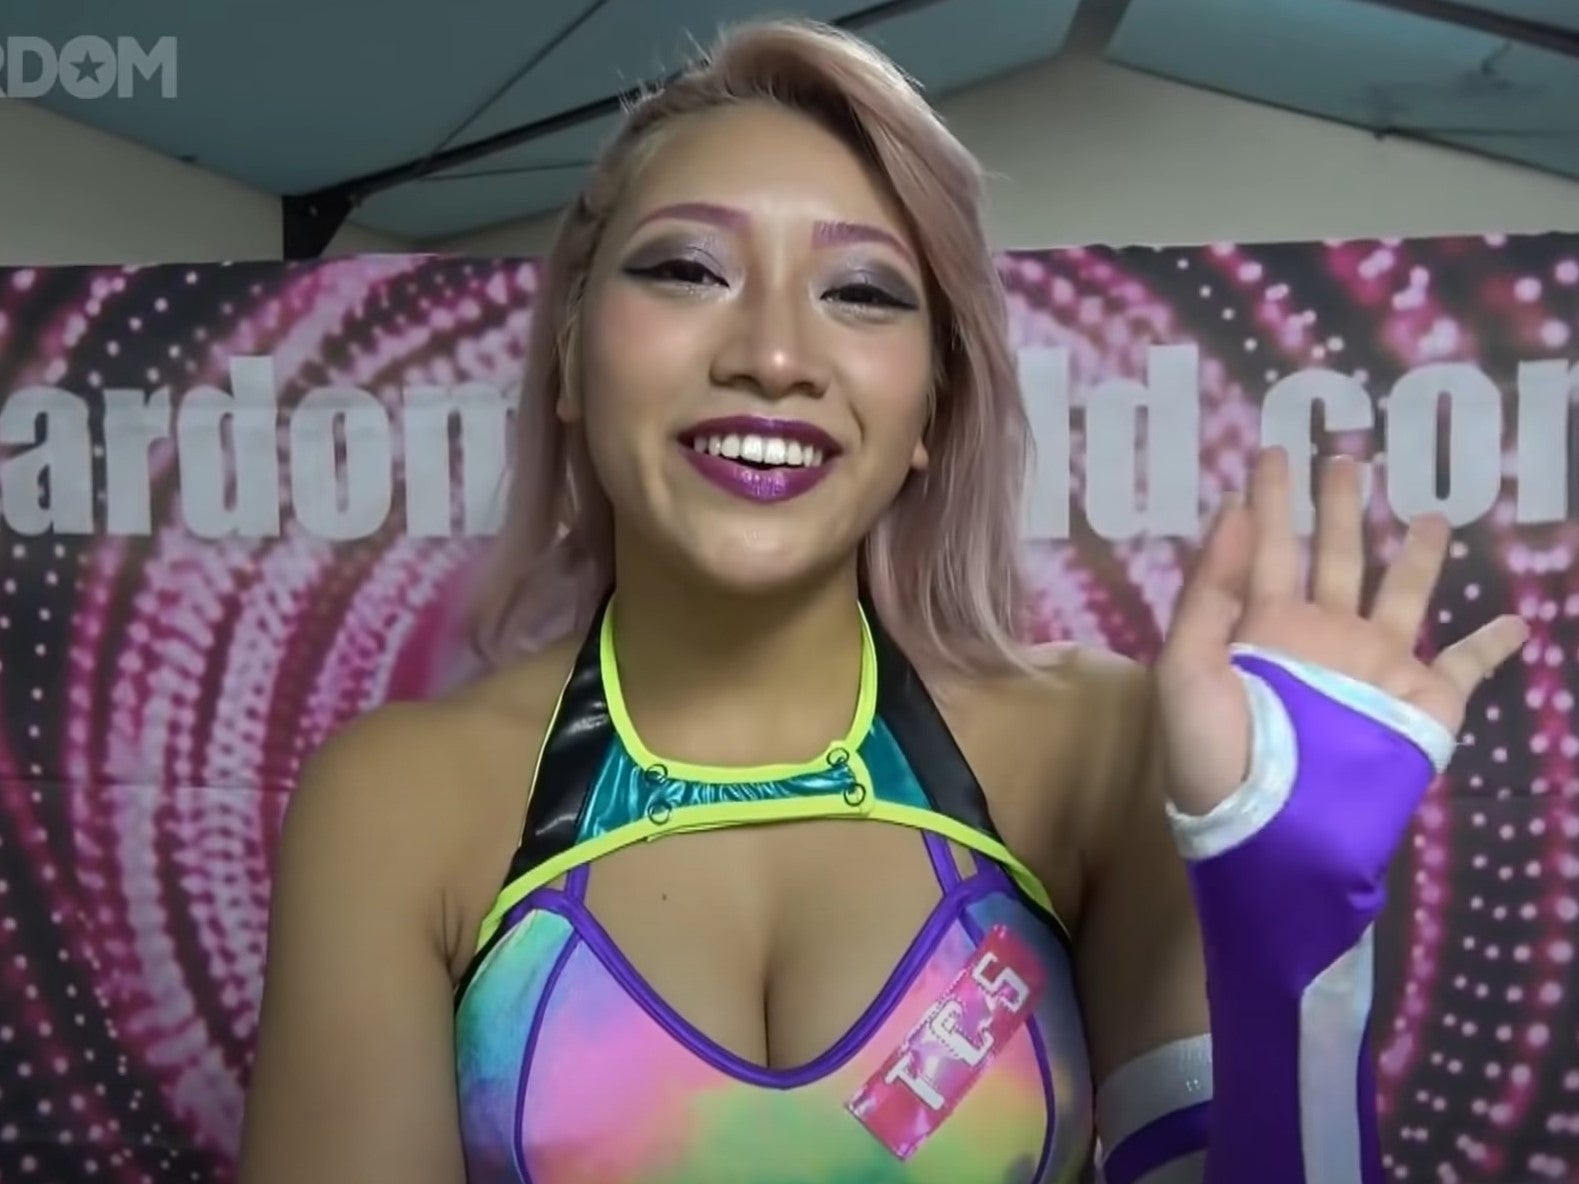 Wrestler and reality TV star Hana Kimura killed herself after receiving online abuse on social media